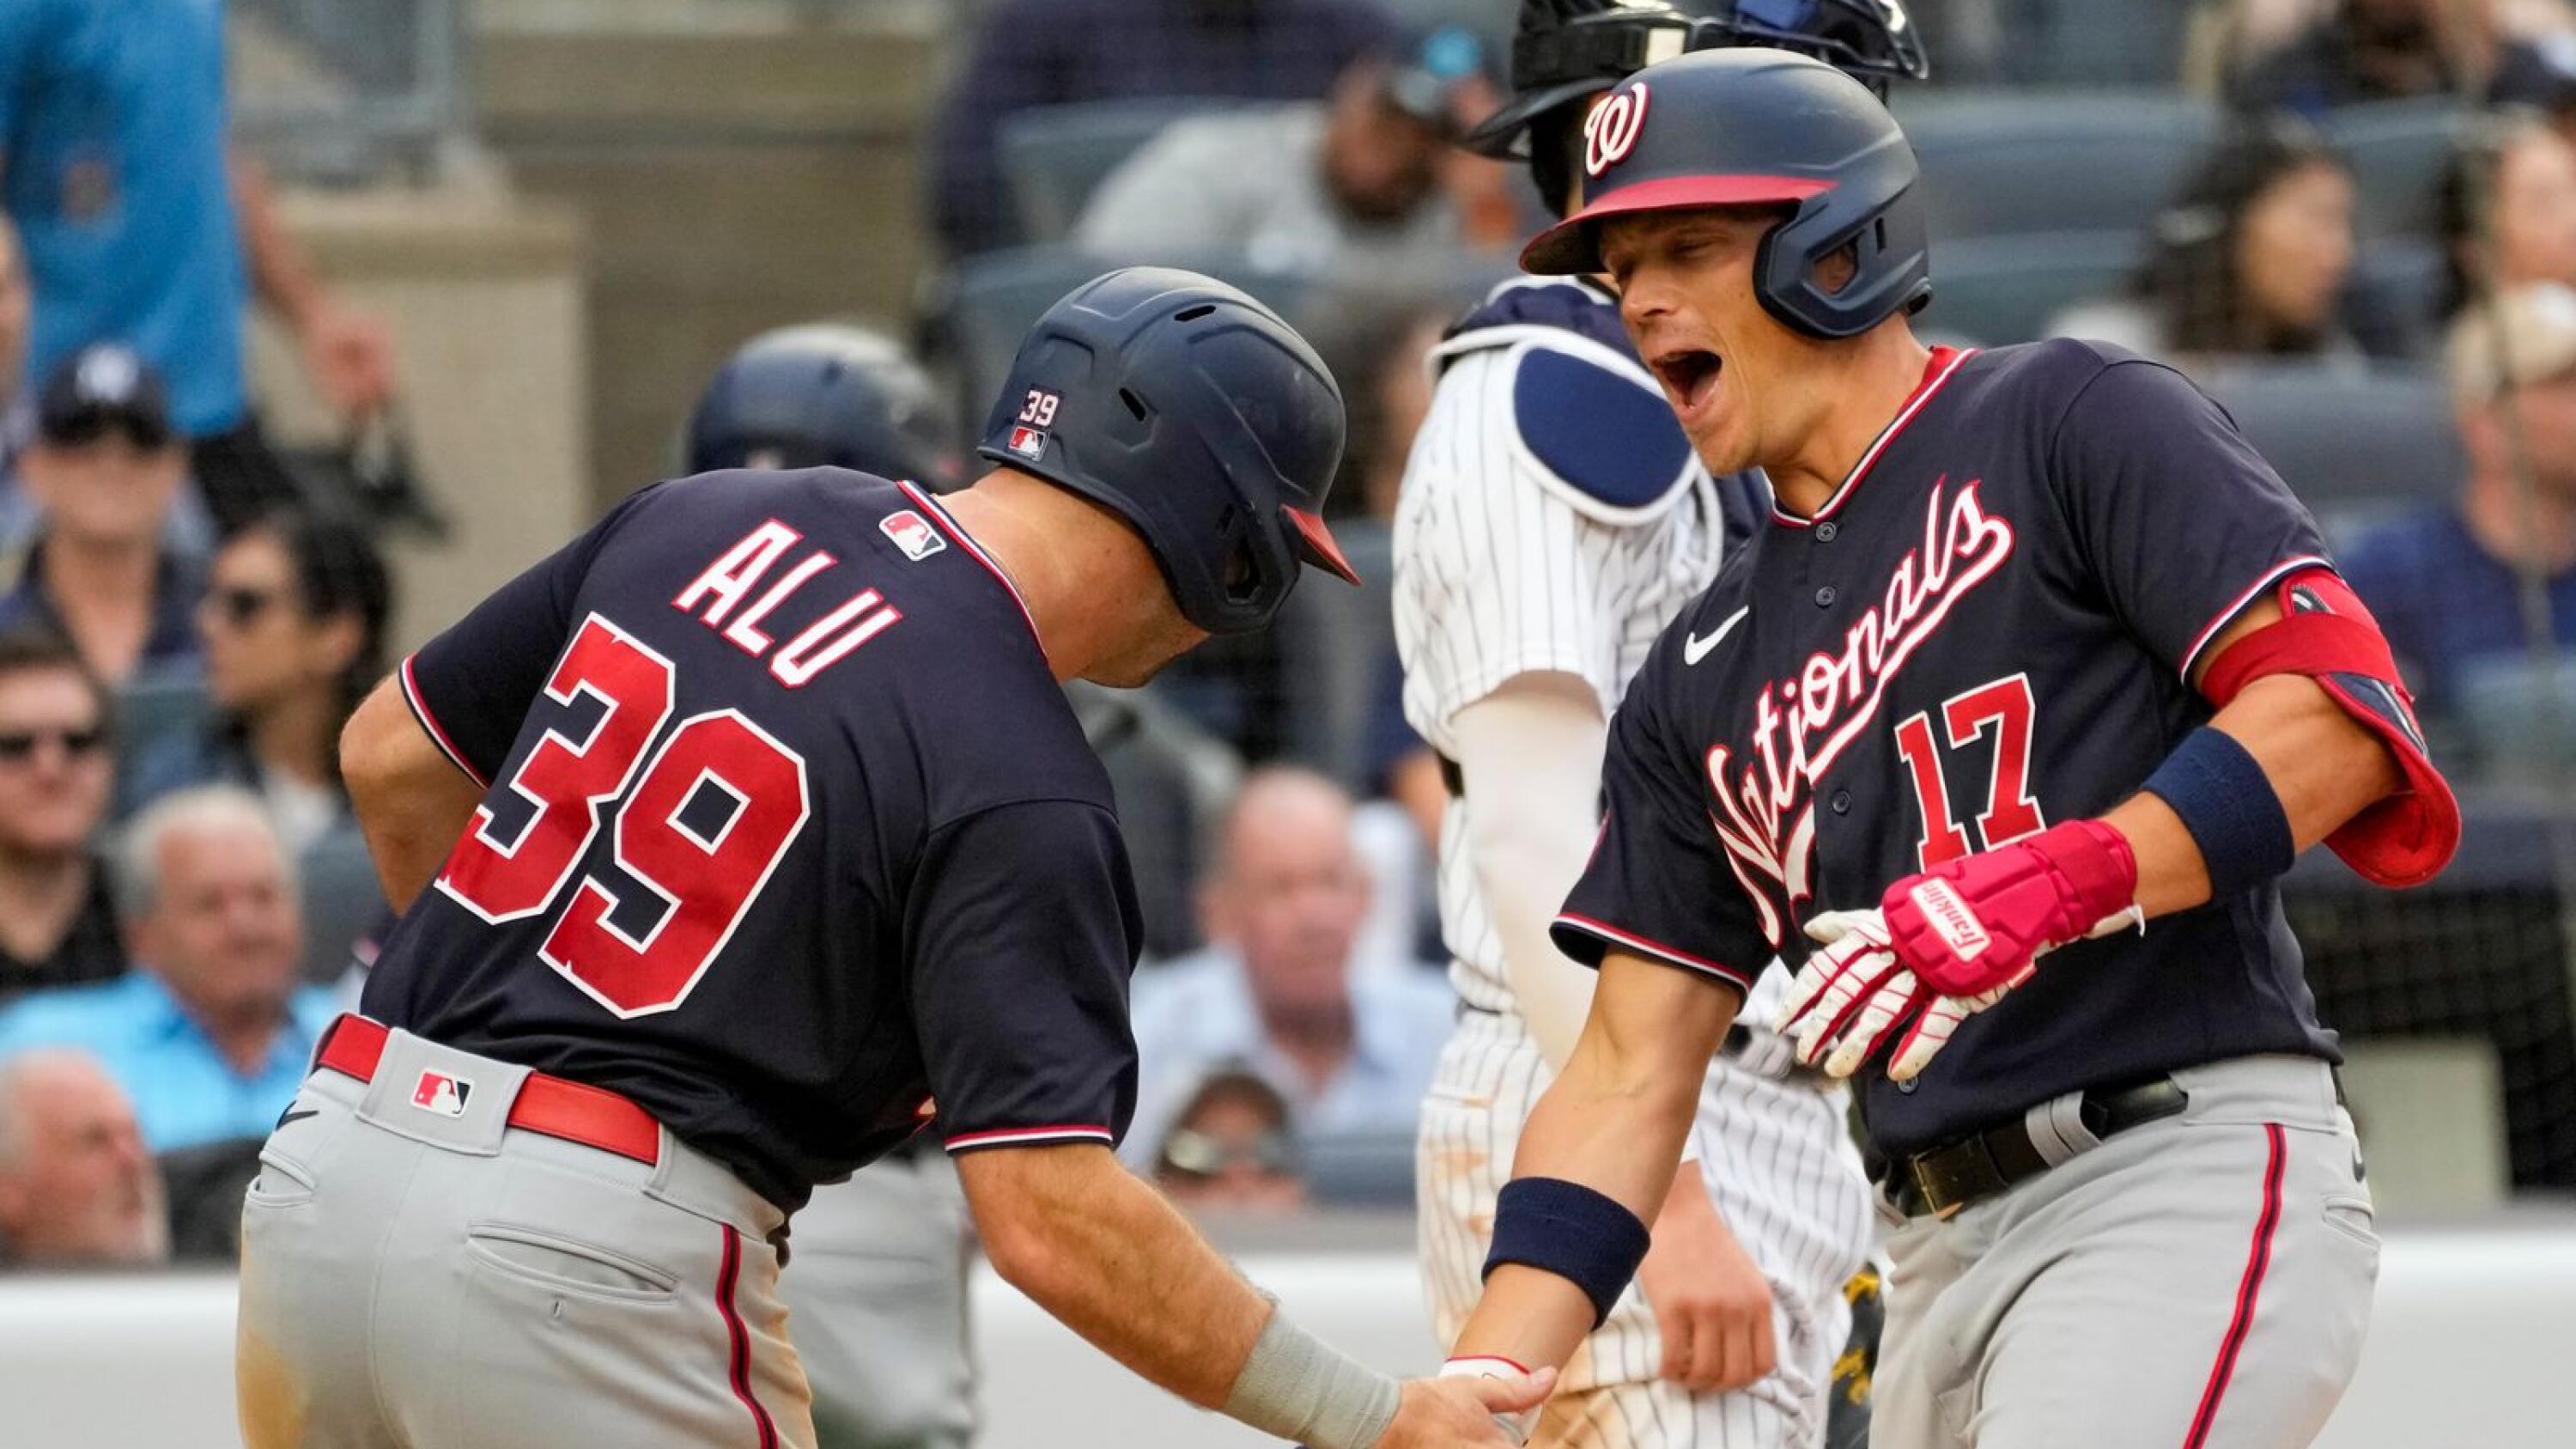 Call, Abrams homer off Kahnle as Nats rally past Yankees 6-5